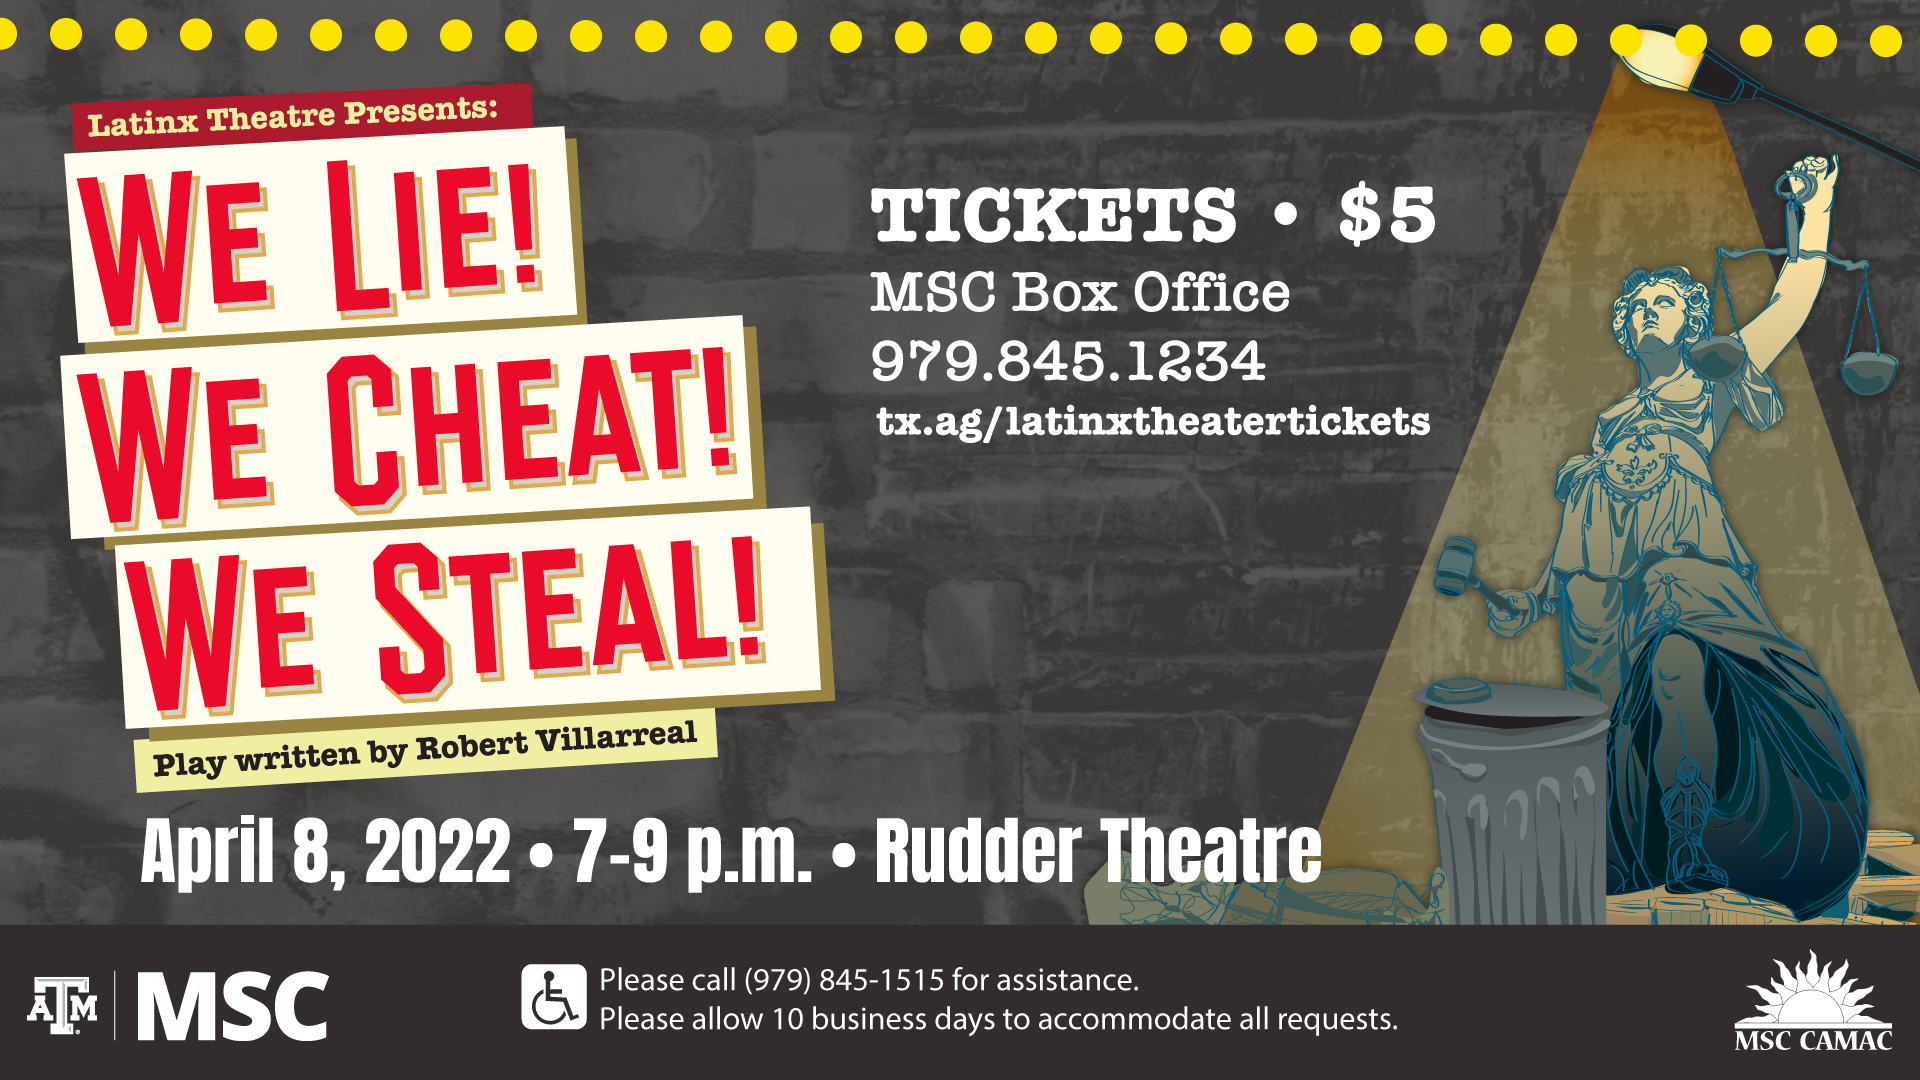 MSC CAMAC Latinx Theatre Presents: We Lie! We Cheat! We Steal! Play written by Robert Villarreal April 8, 2022 from 7 to 9 p.m. at Rudder Theatre. Tickets $5, MSC Box Office , 979.845.1234 website: tx.ag/latinxtheatertickets. Please call (979) 845-1515 for assistance. Please allow 10 business days to accommodate all requests